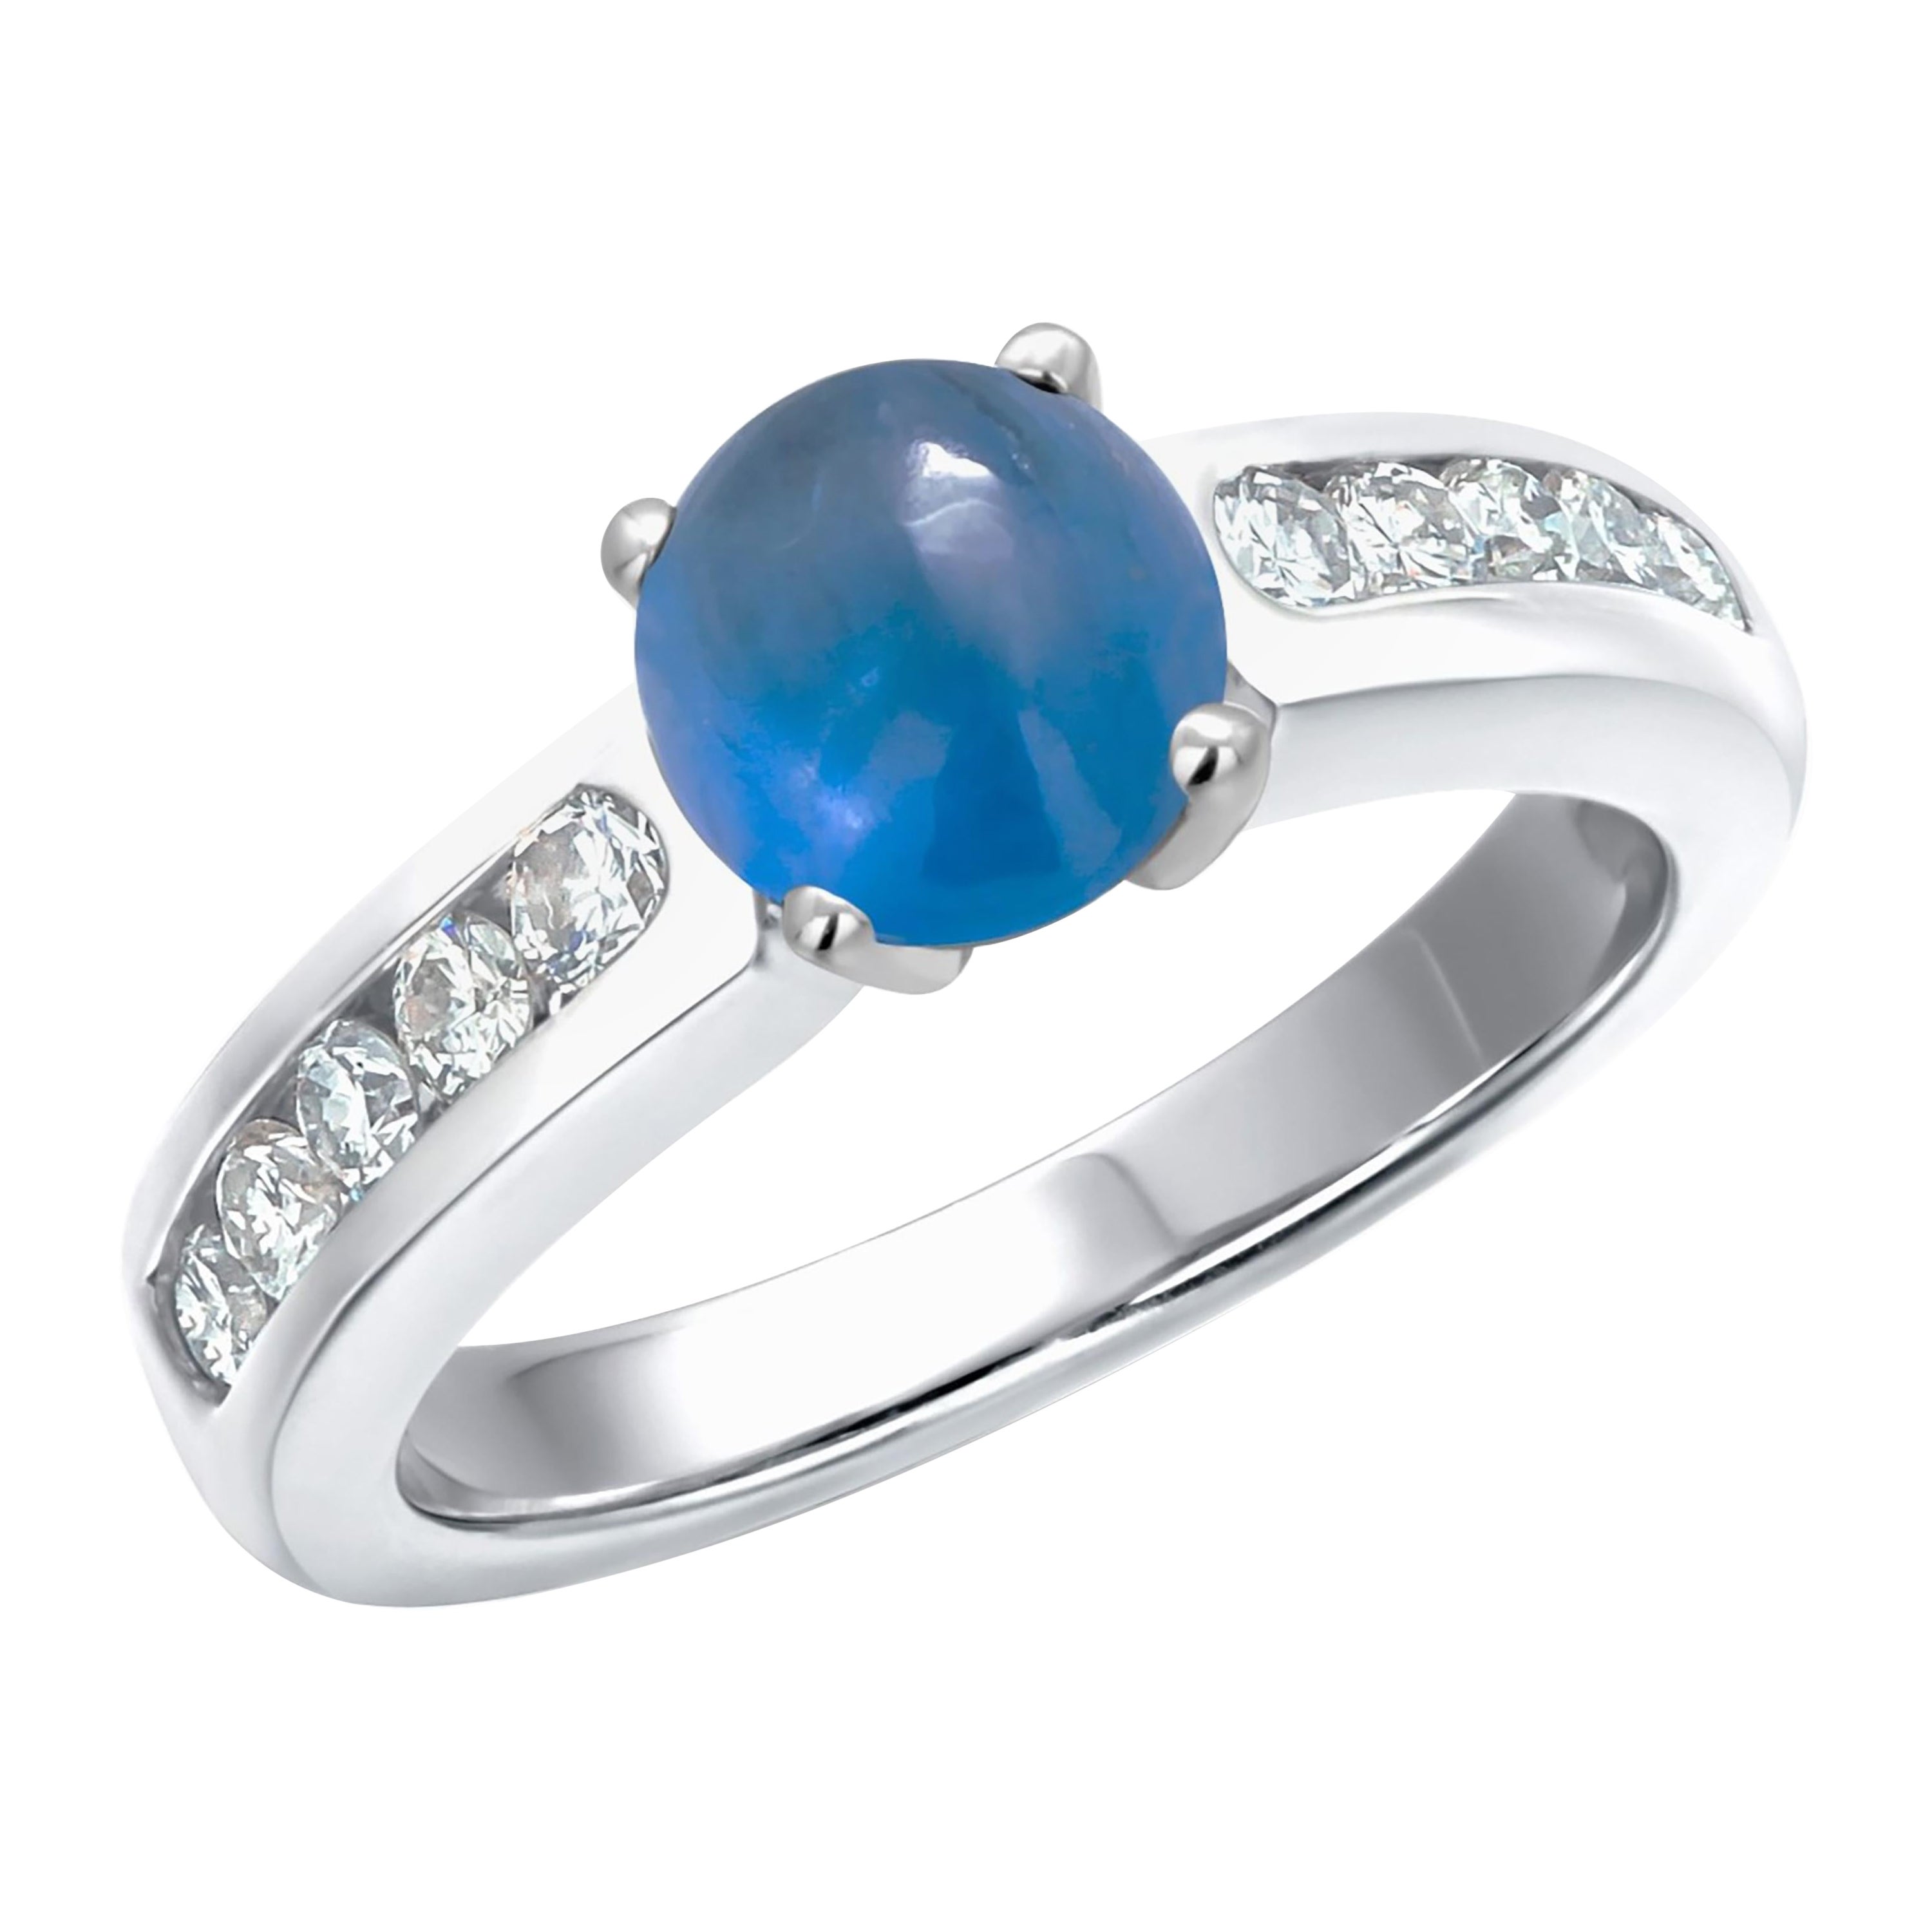 GIA Certified No Heat Cabochon Sapphire 1.51 Diamond 0.30 Carat Platinum Ring For Sale